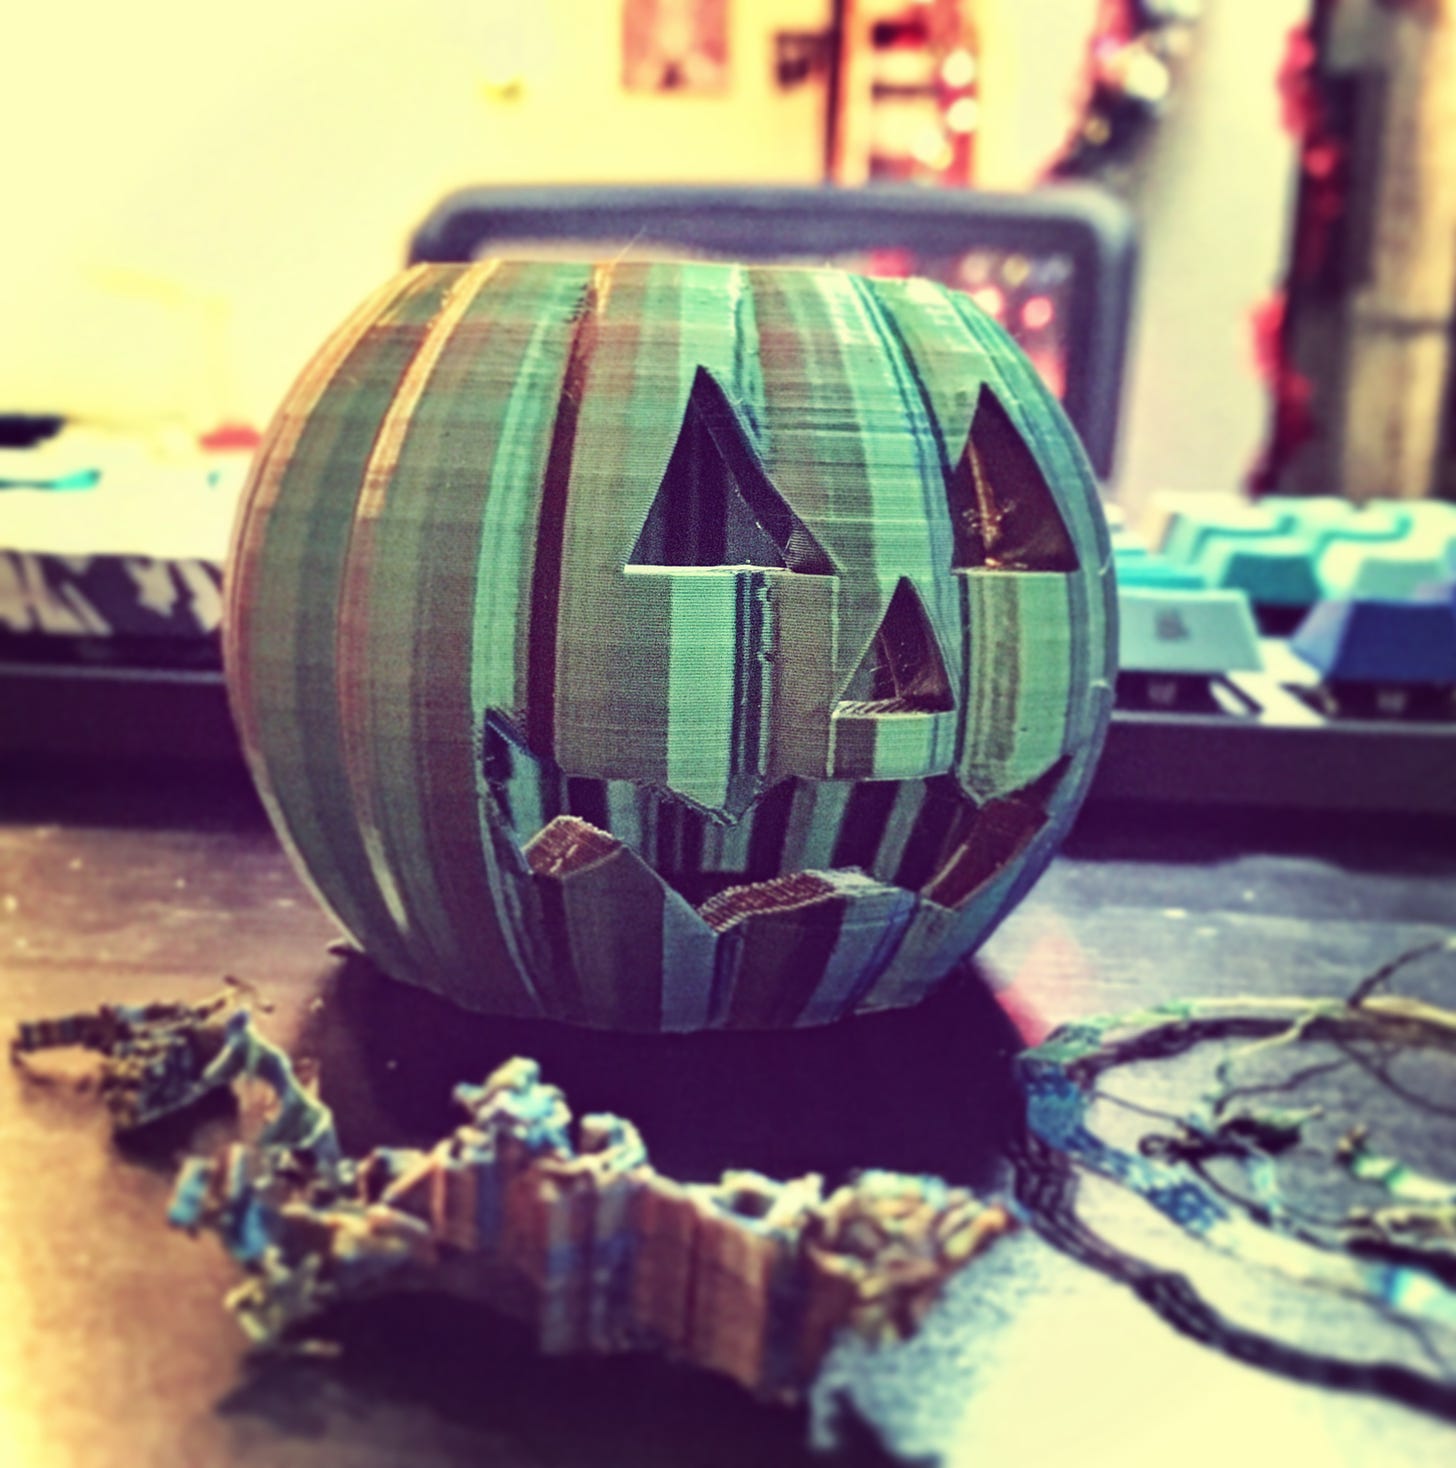 3D printed pumpkin carved for Halloween